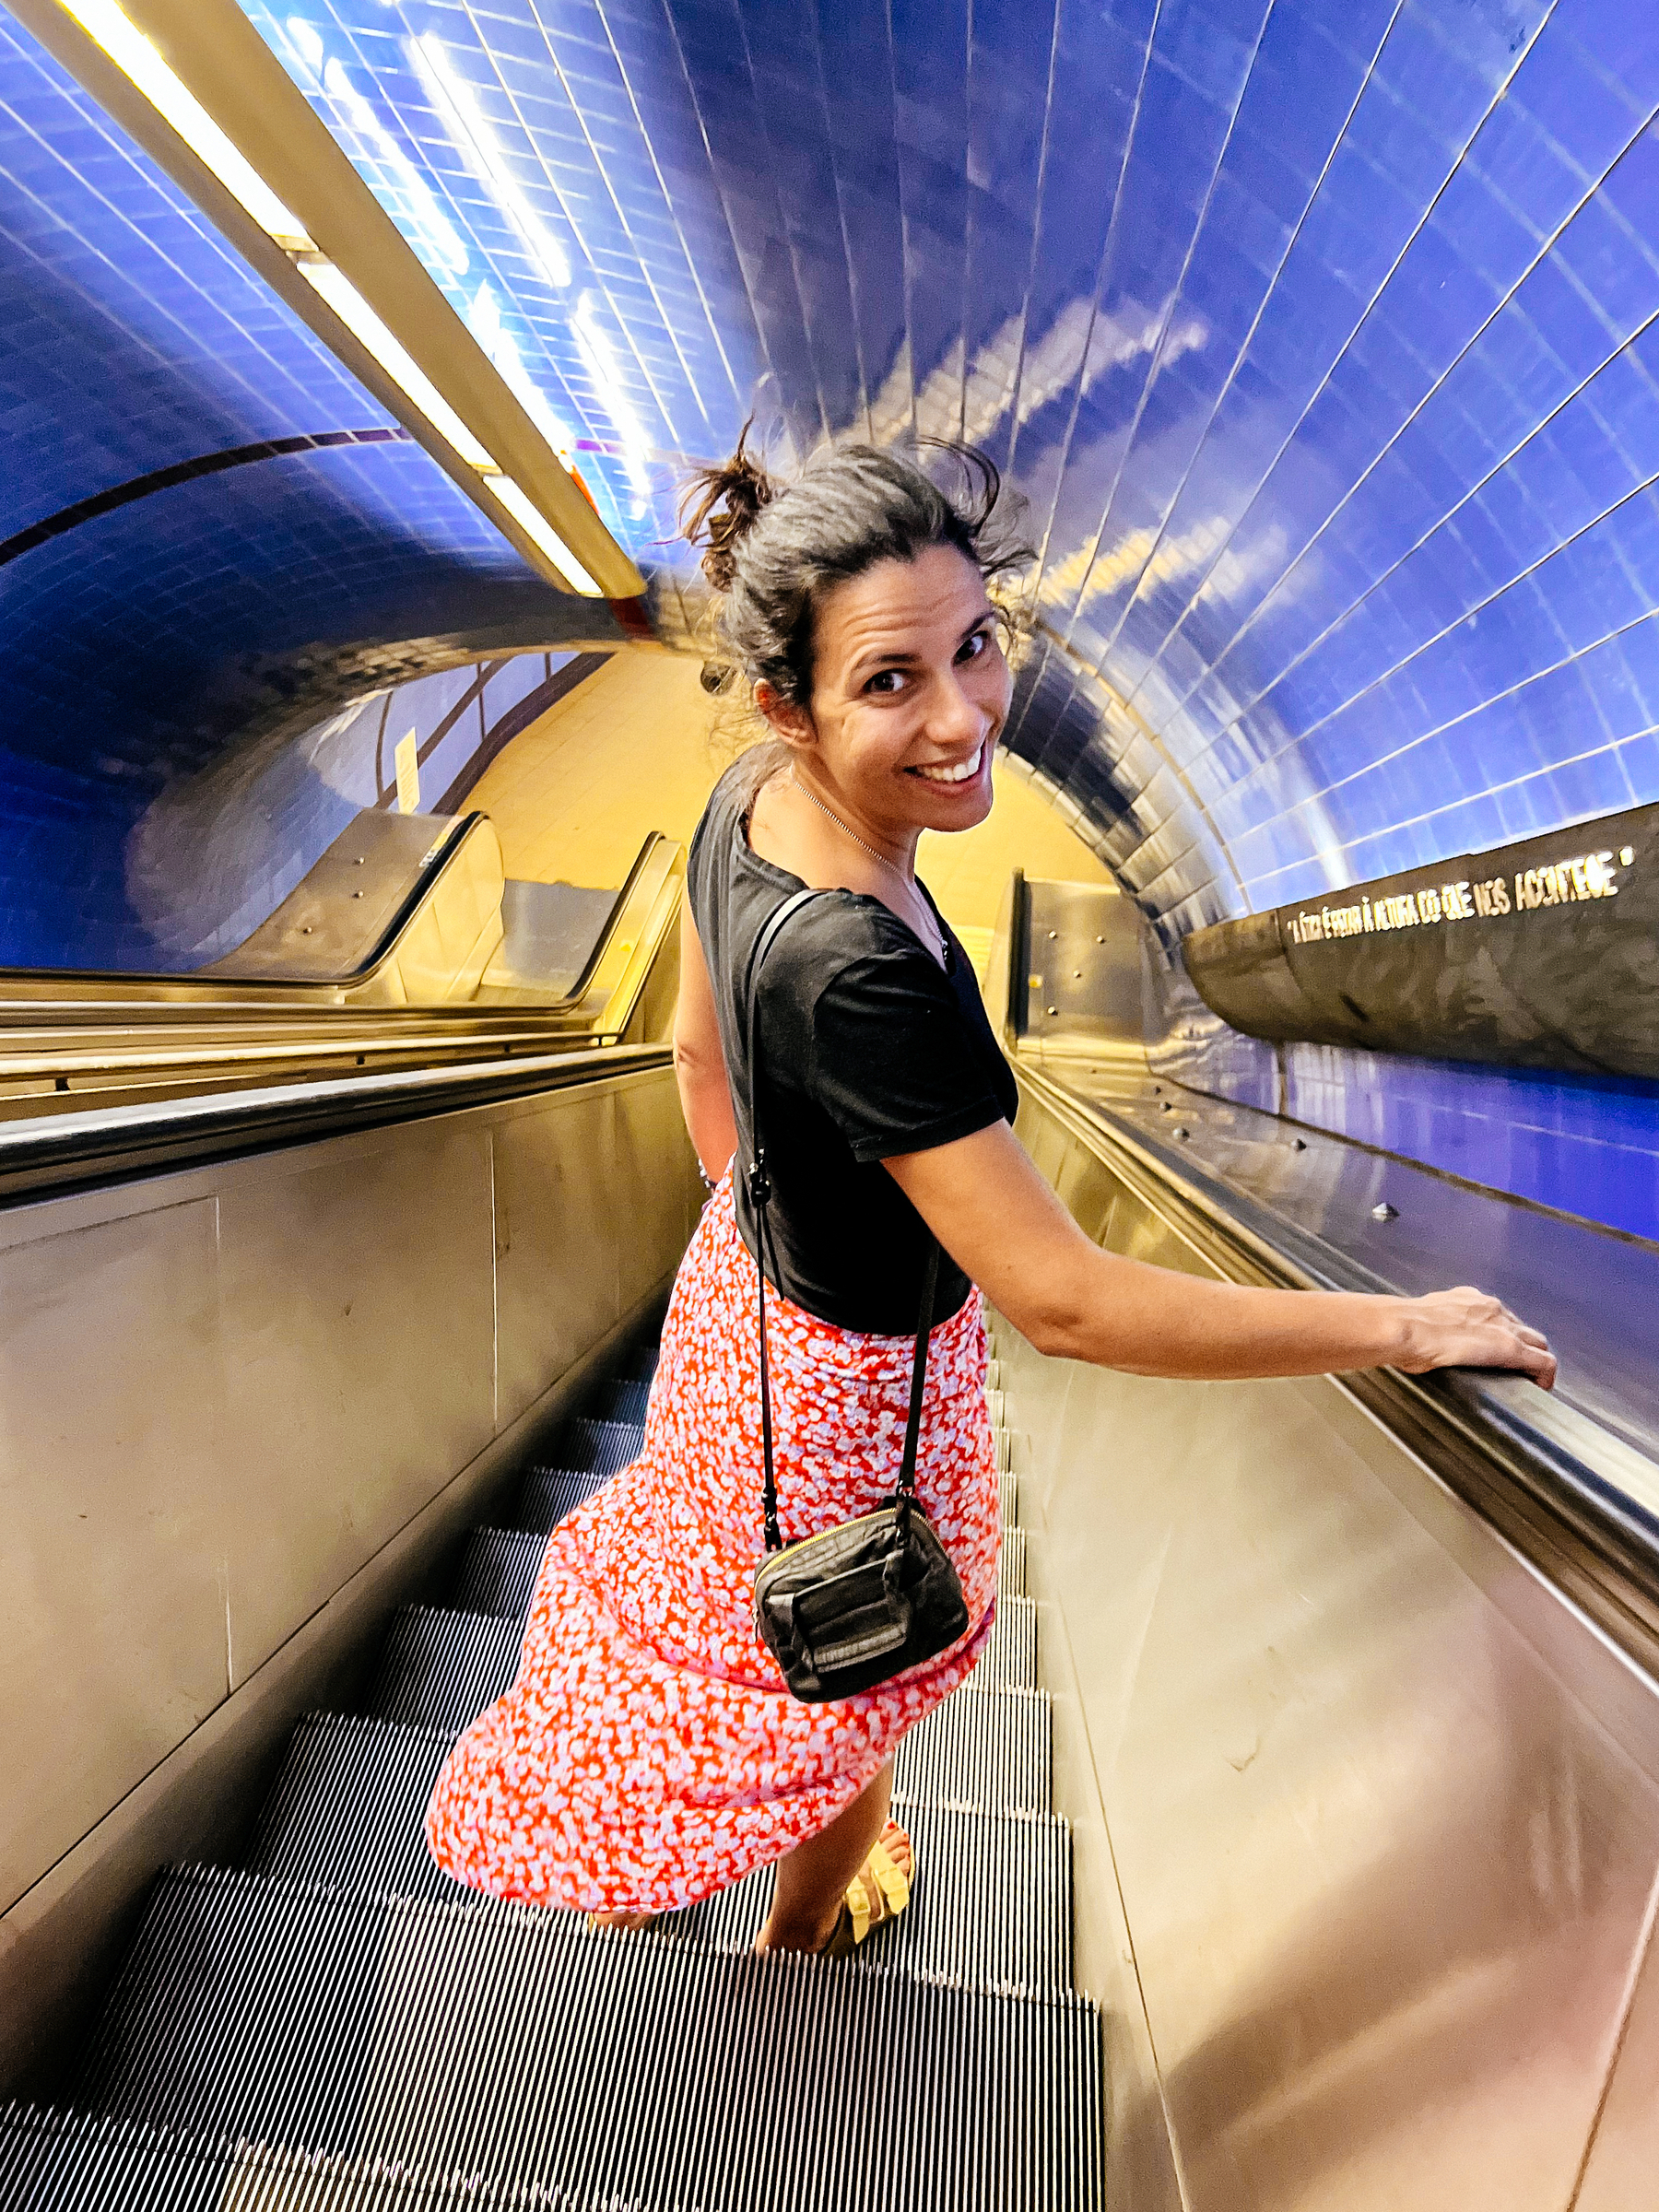 A woman going down an escalator, looking back at us, beautiful smile on her face. 